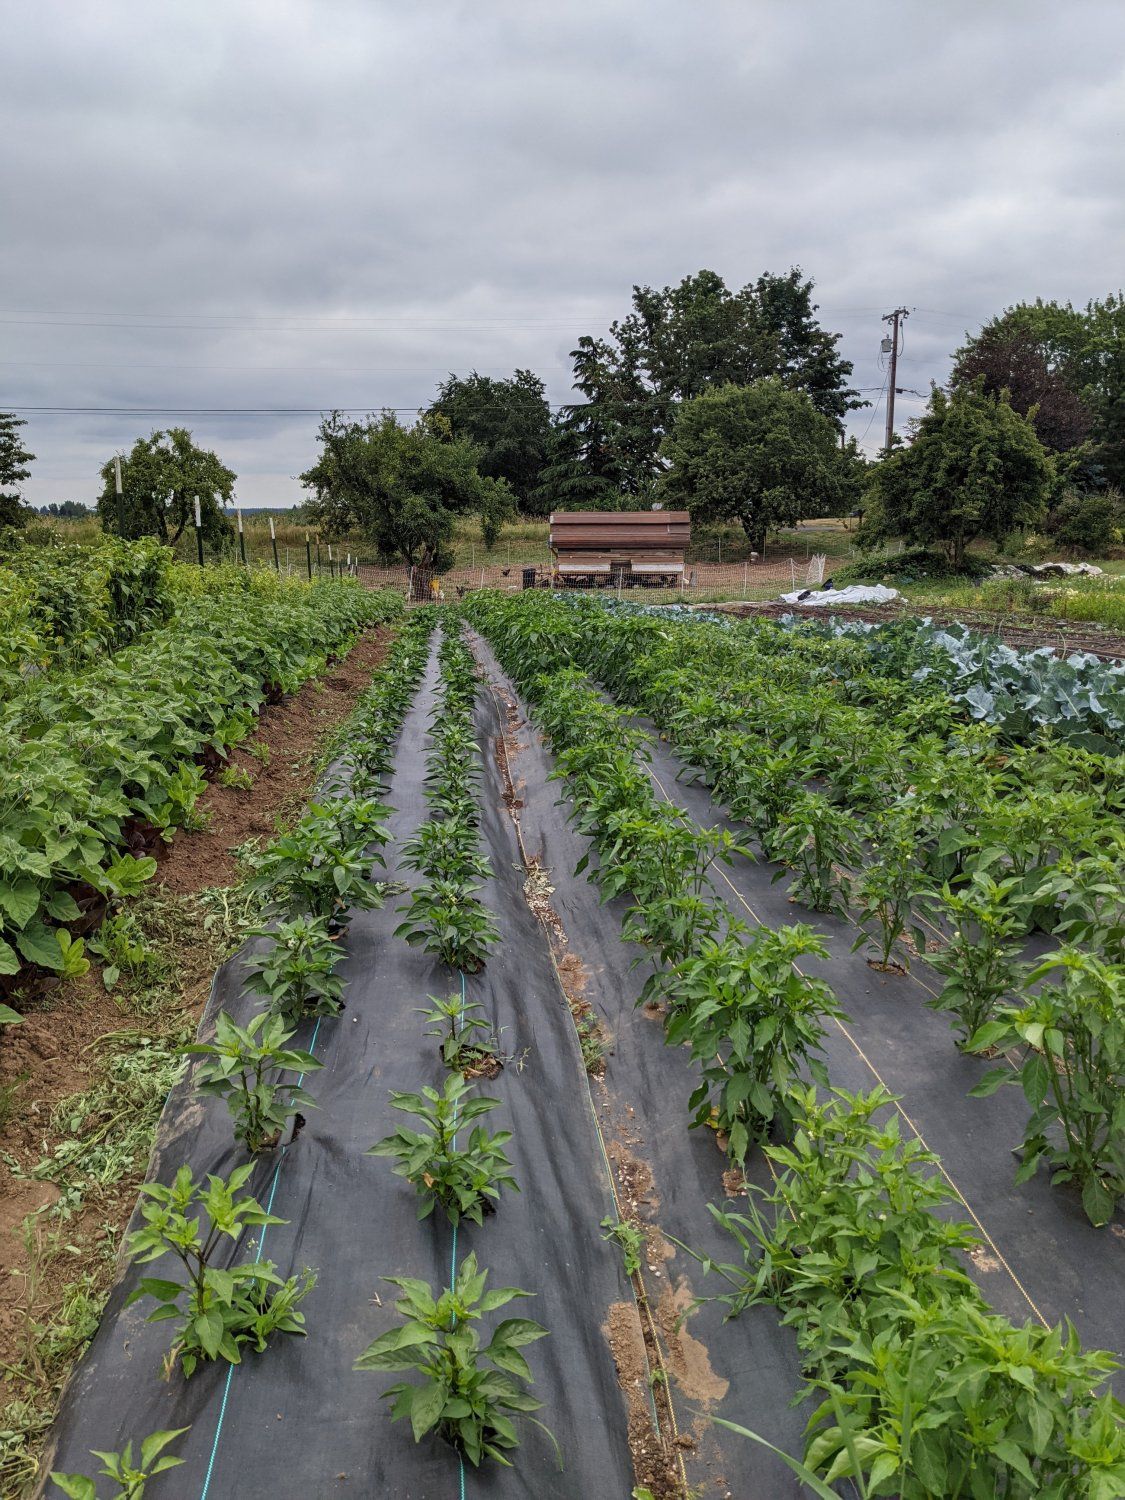 Previous Happening: Farm Happening's for July 12